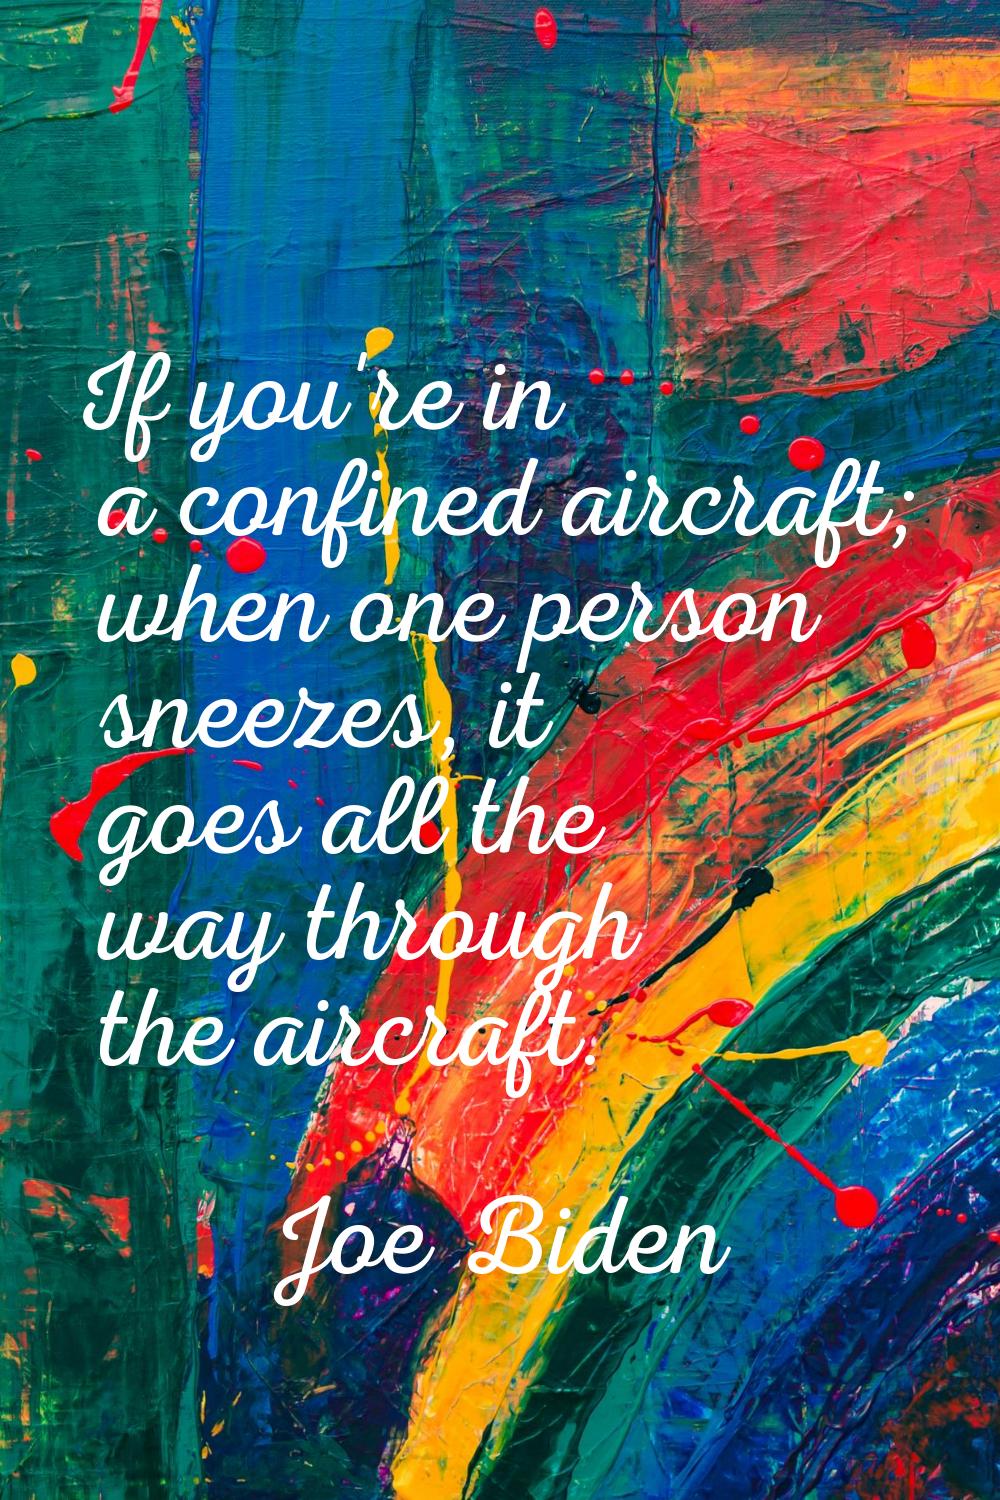 If you're in a confined aircraft; when one person sneezes, it goes all the way through the aircraft